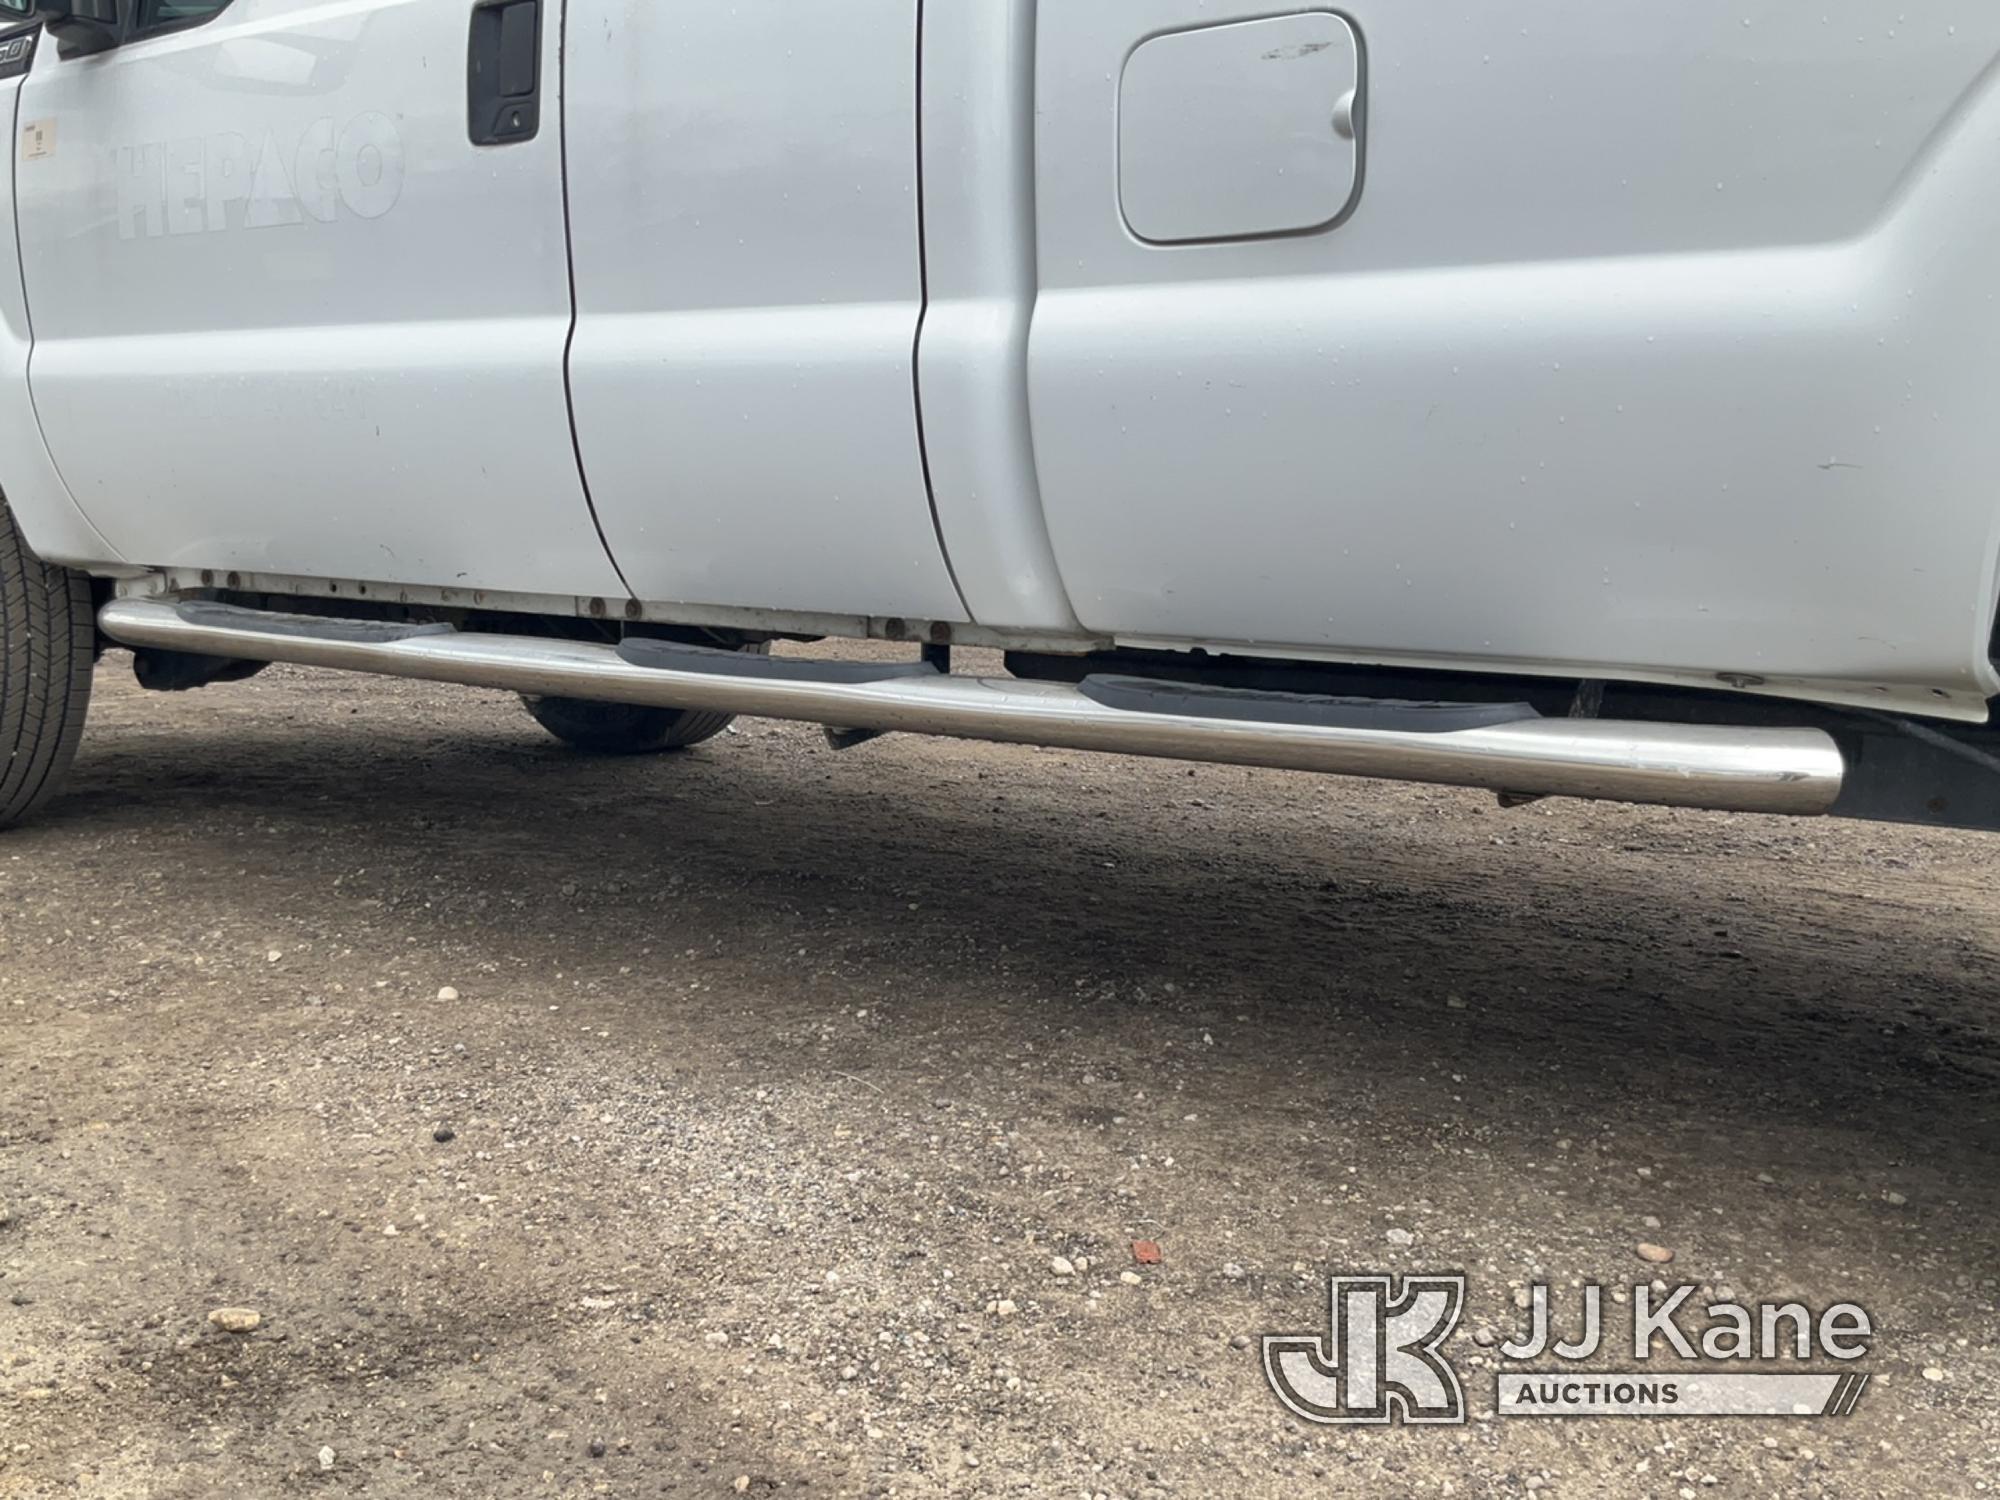 (South Beloit, IL) 2015 Ford F250 4x4 Extended-Cab Pickup Truck Runs & Moves) (Rough Idle, Check Eng